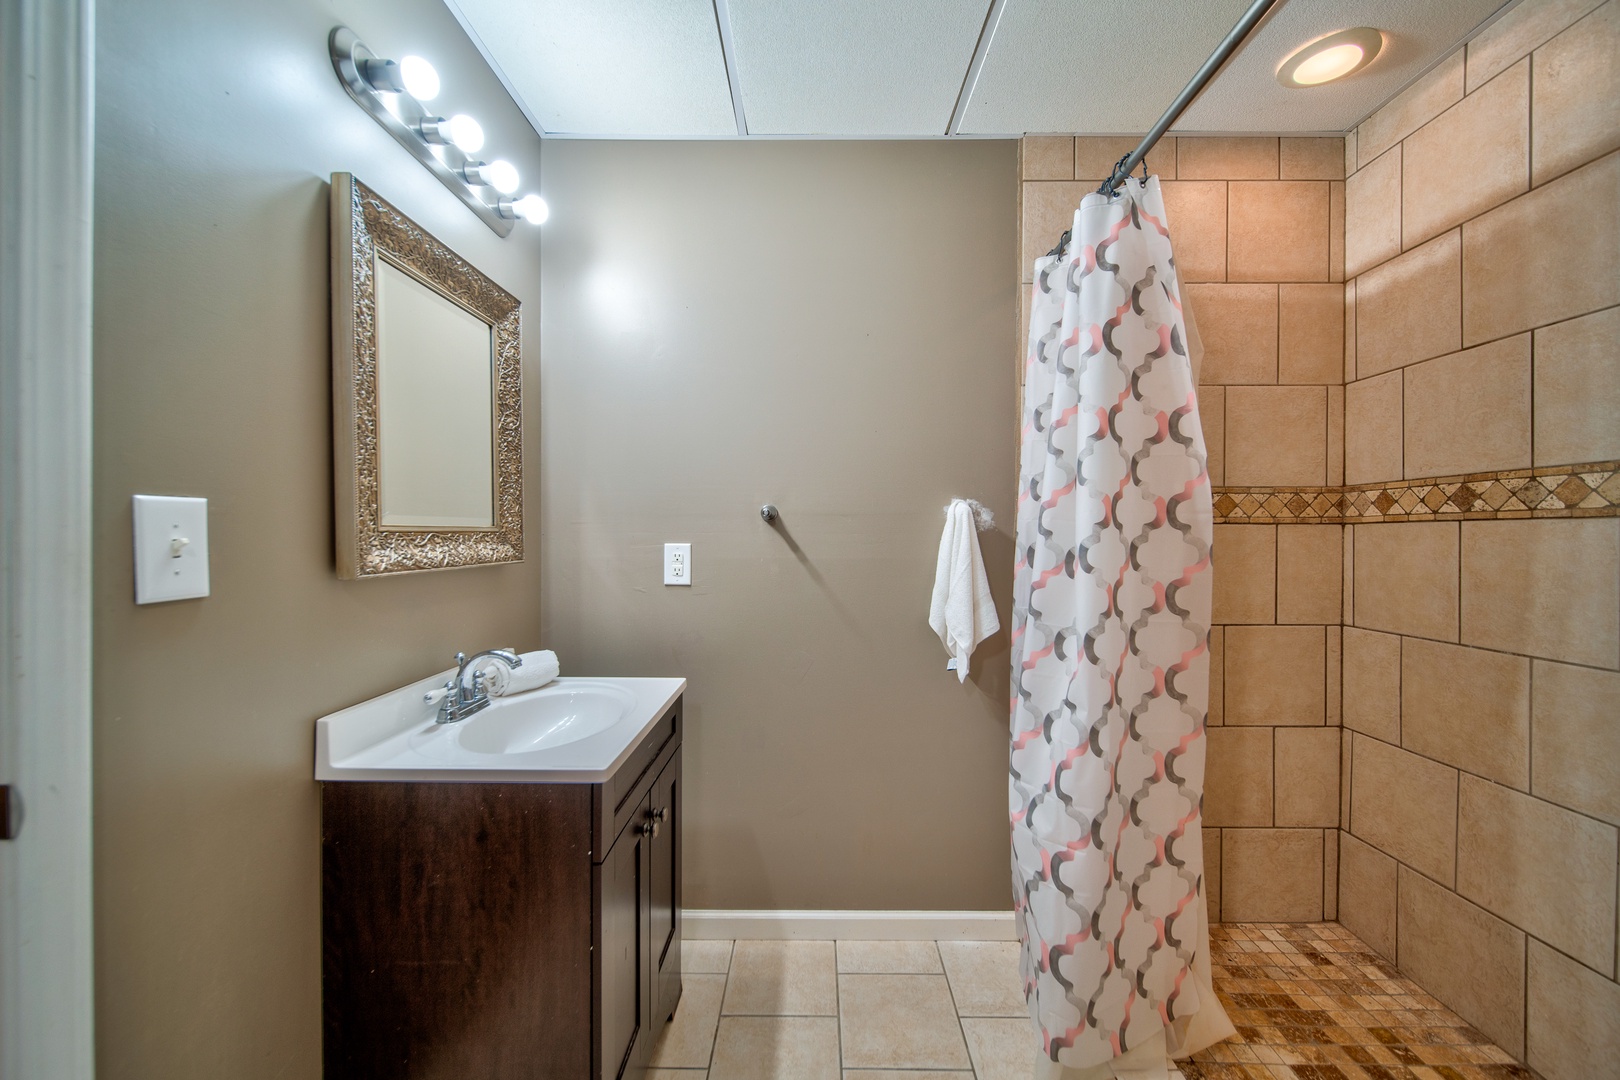 The lower level includes a full bathroom, offering a single vanity & shower